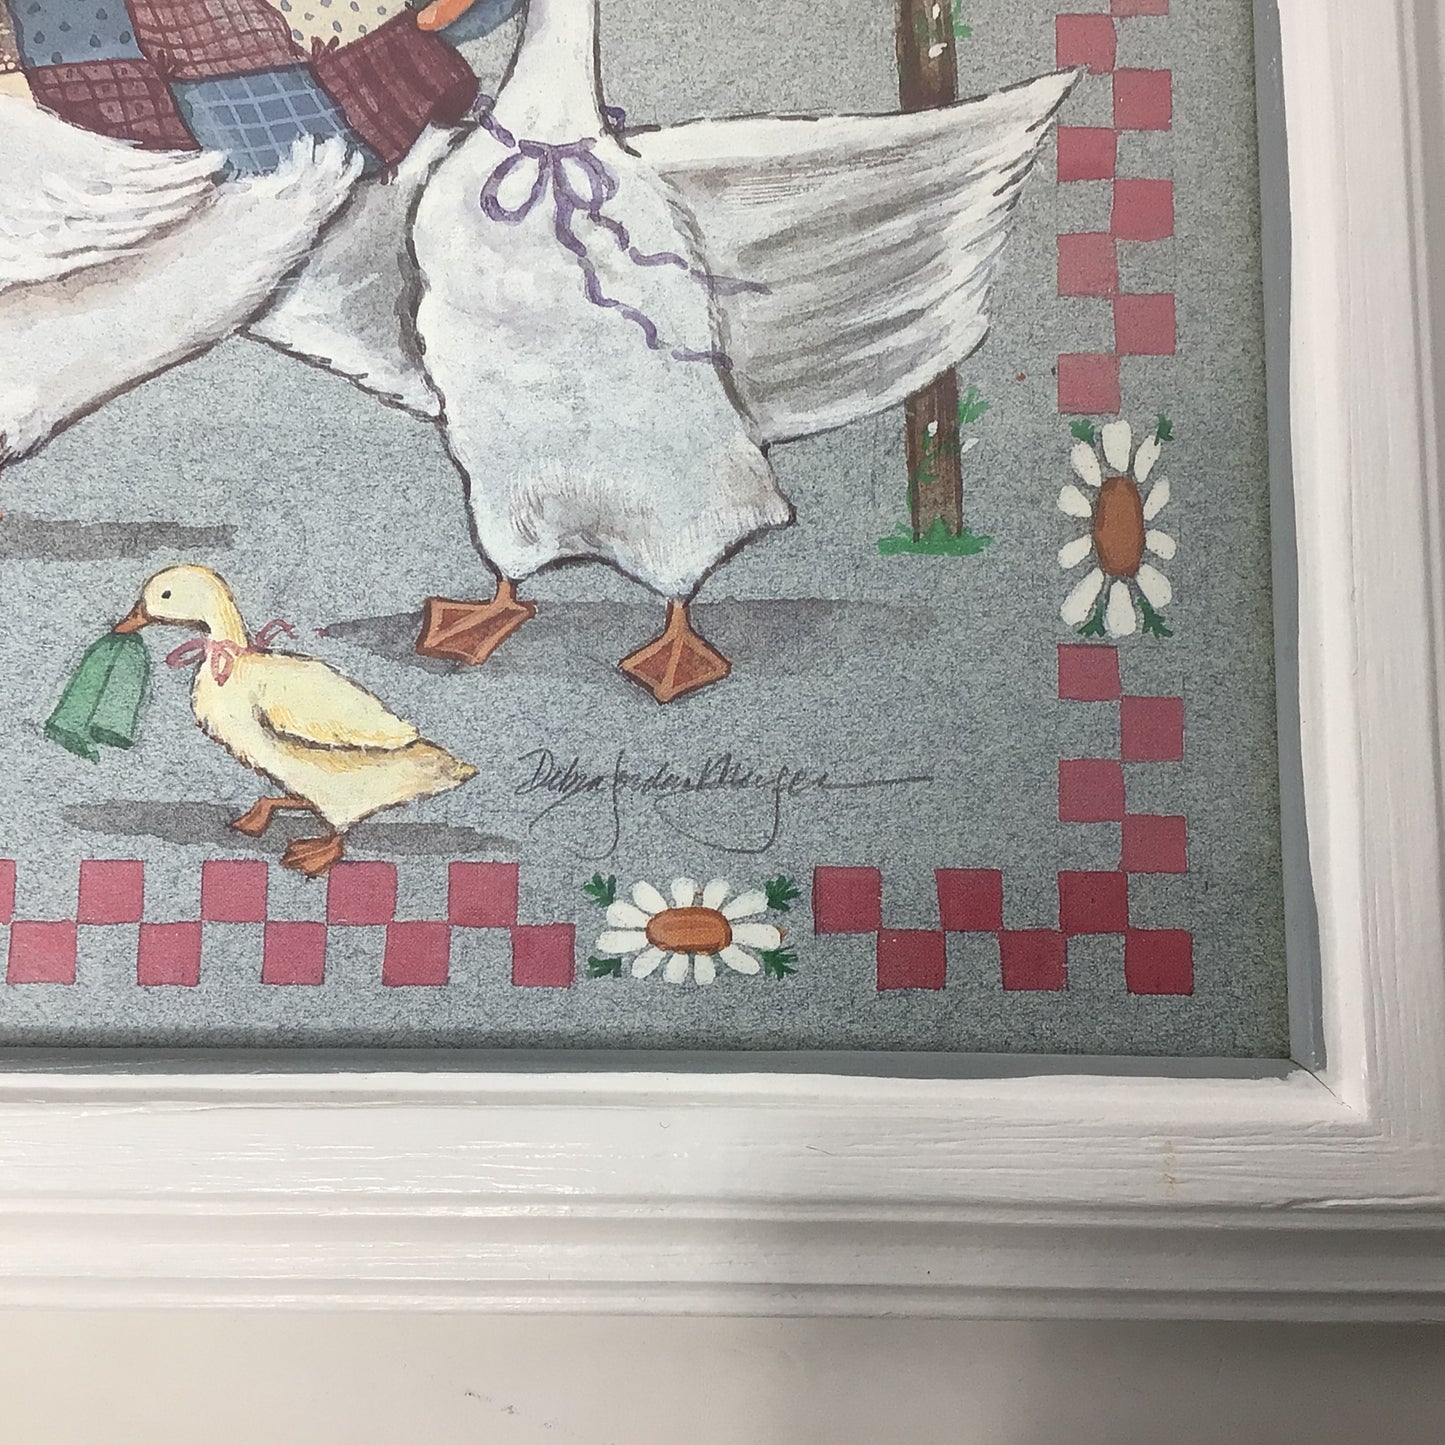 “Our Laundry Has the Latest Dirt” Framed Duck Picture